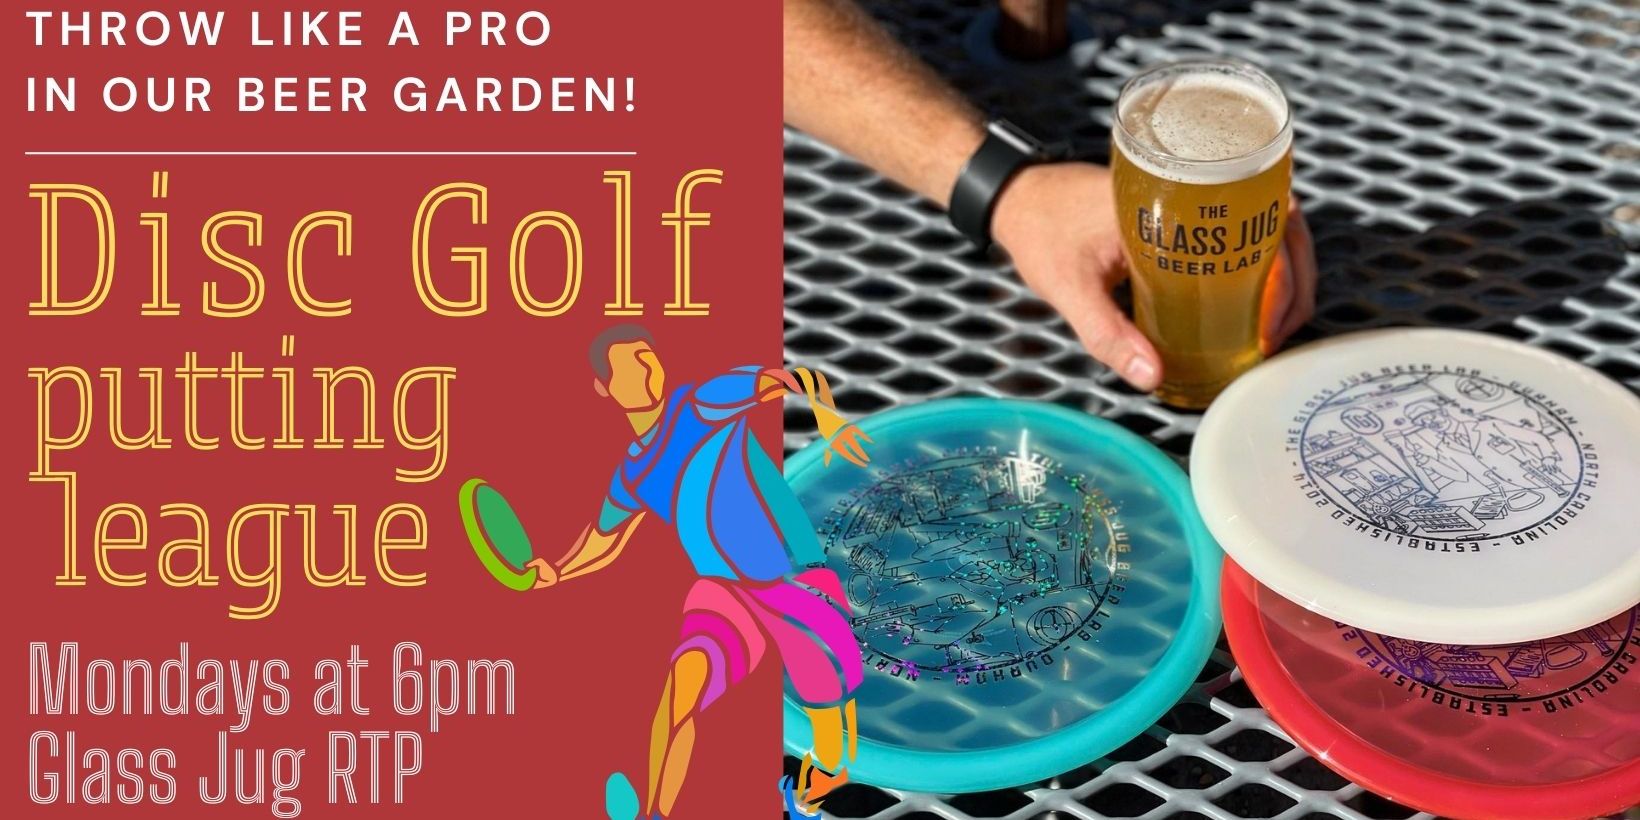 Disc Golf Putting League promotional image